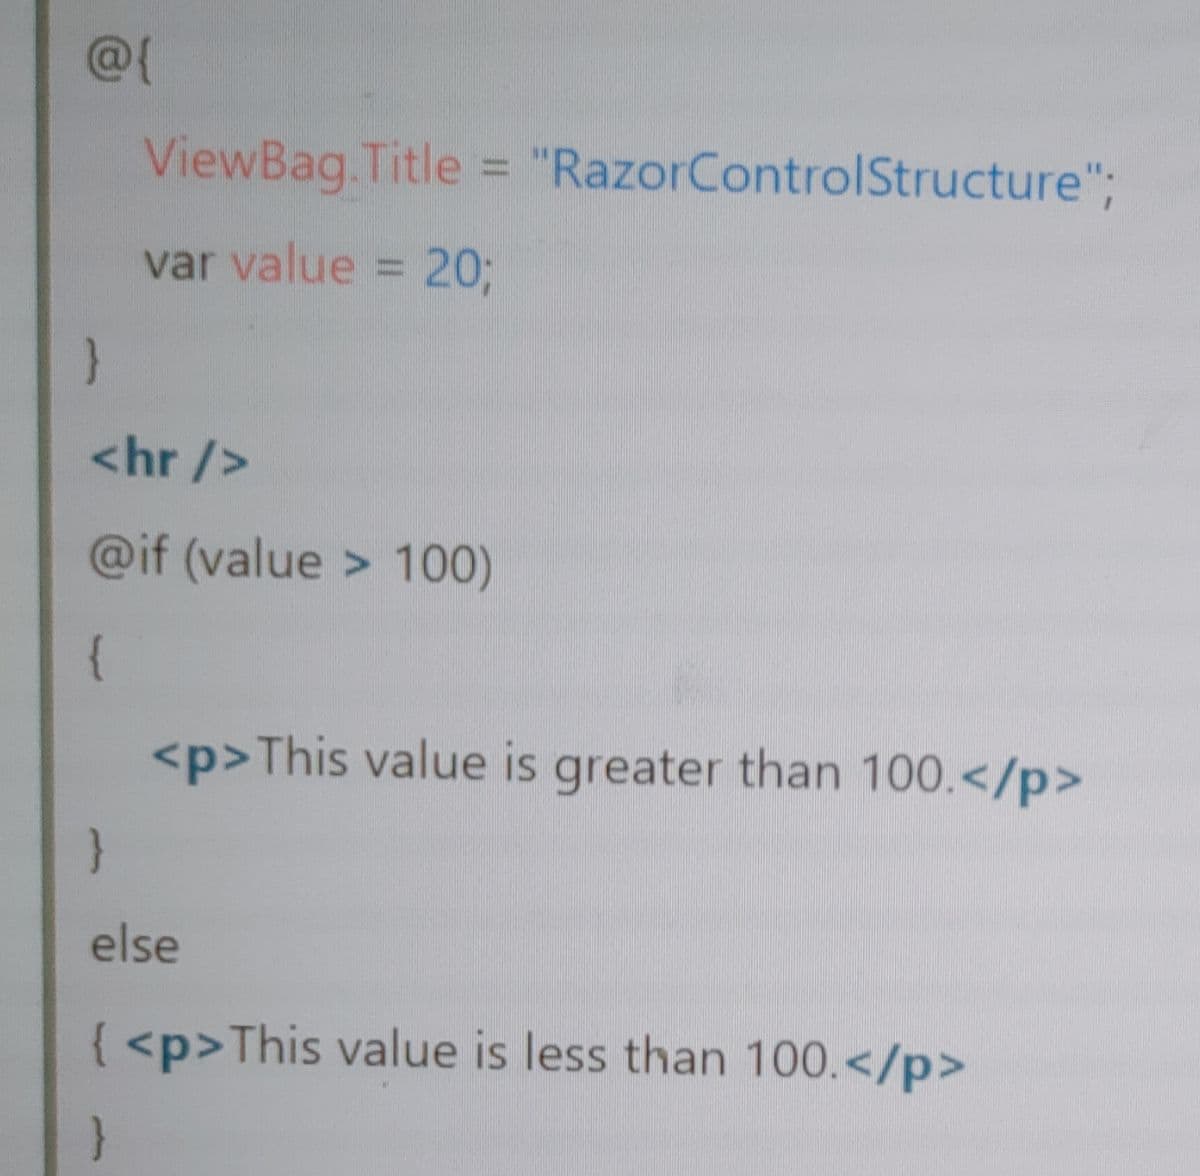 @{
ViewBag.Title = "RazorControlStructure";
var value = 20%3B
<hr />
@if (value > 100)
{
<p>This value is greater than 100.</p>
else
{ <p>This value is less than 100.</p>
